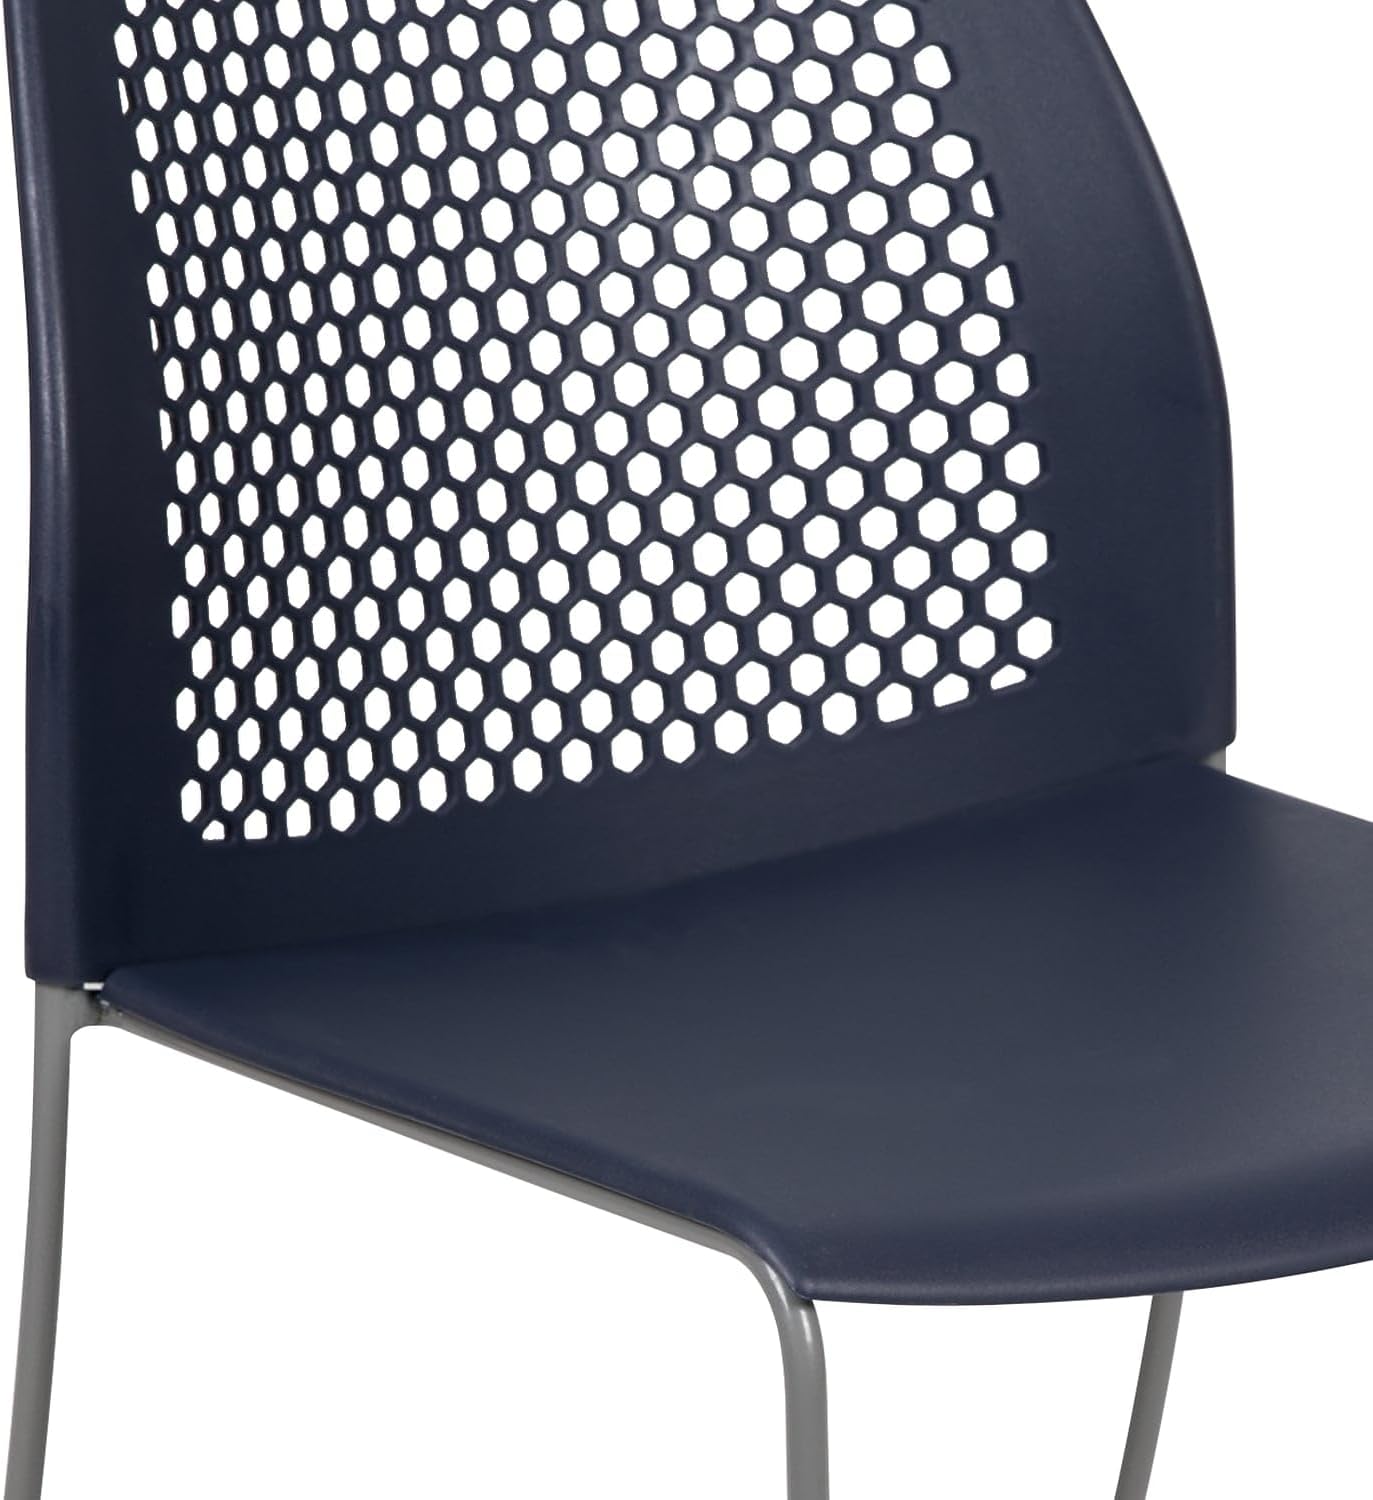 Flash Furniture HERCULES Series 661 lb. Capacity Navy Stack Chair with Air-Vent Back and Gray Powder Coated Sled Base